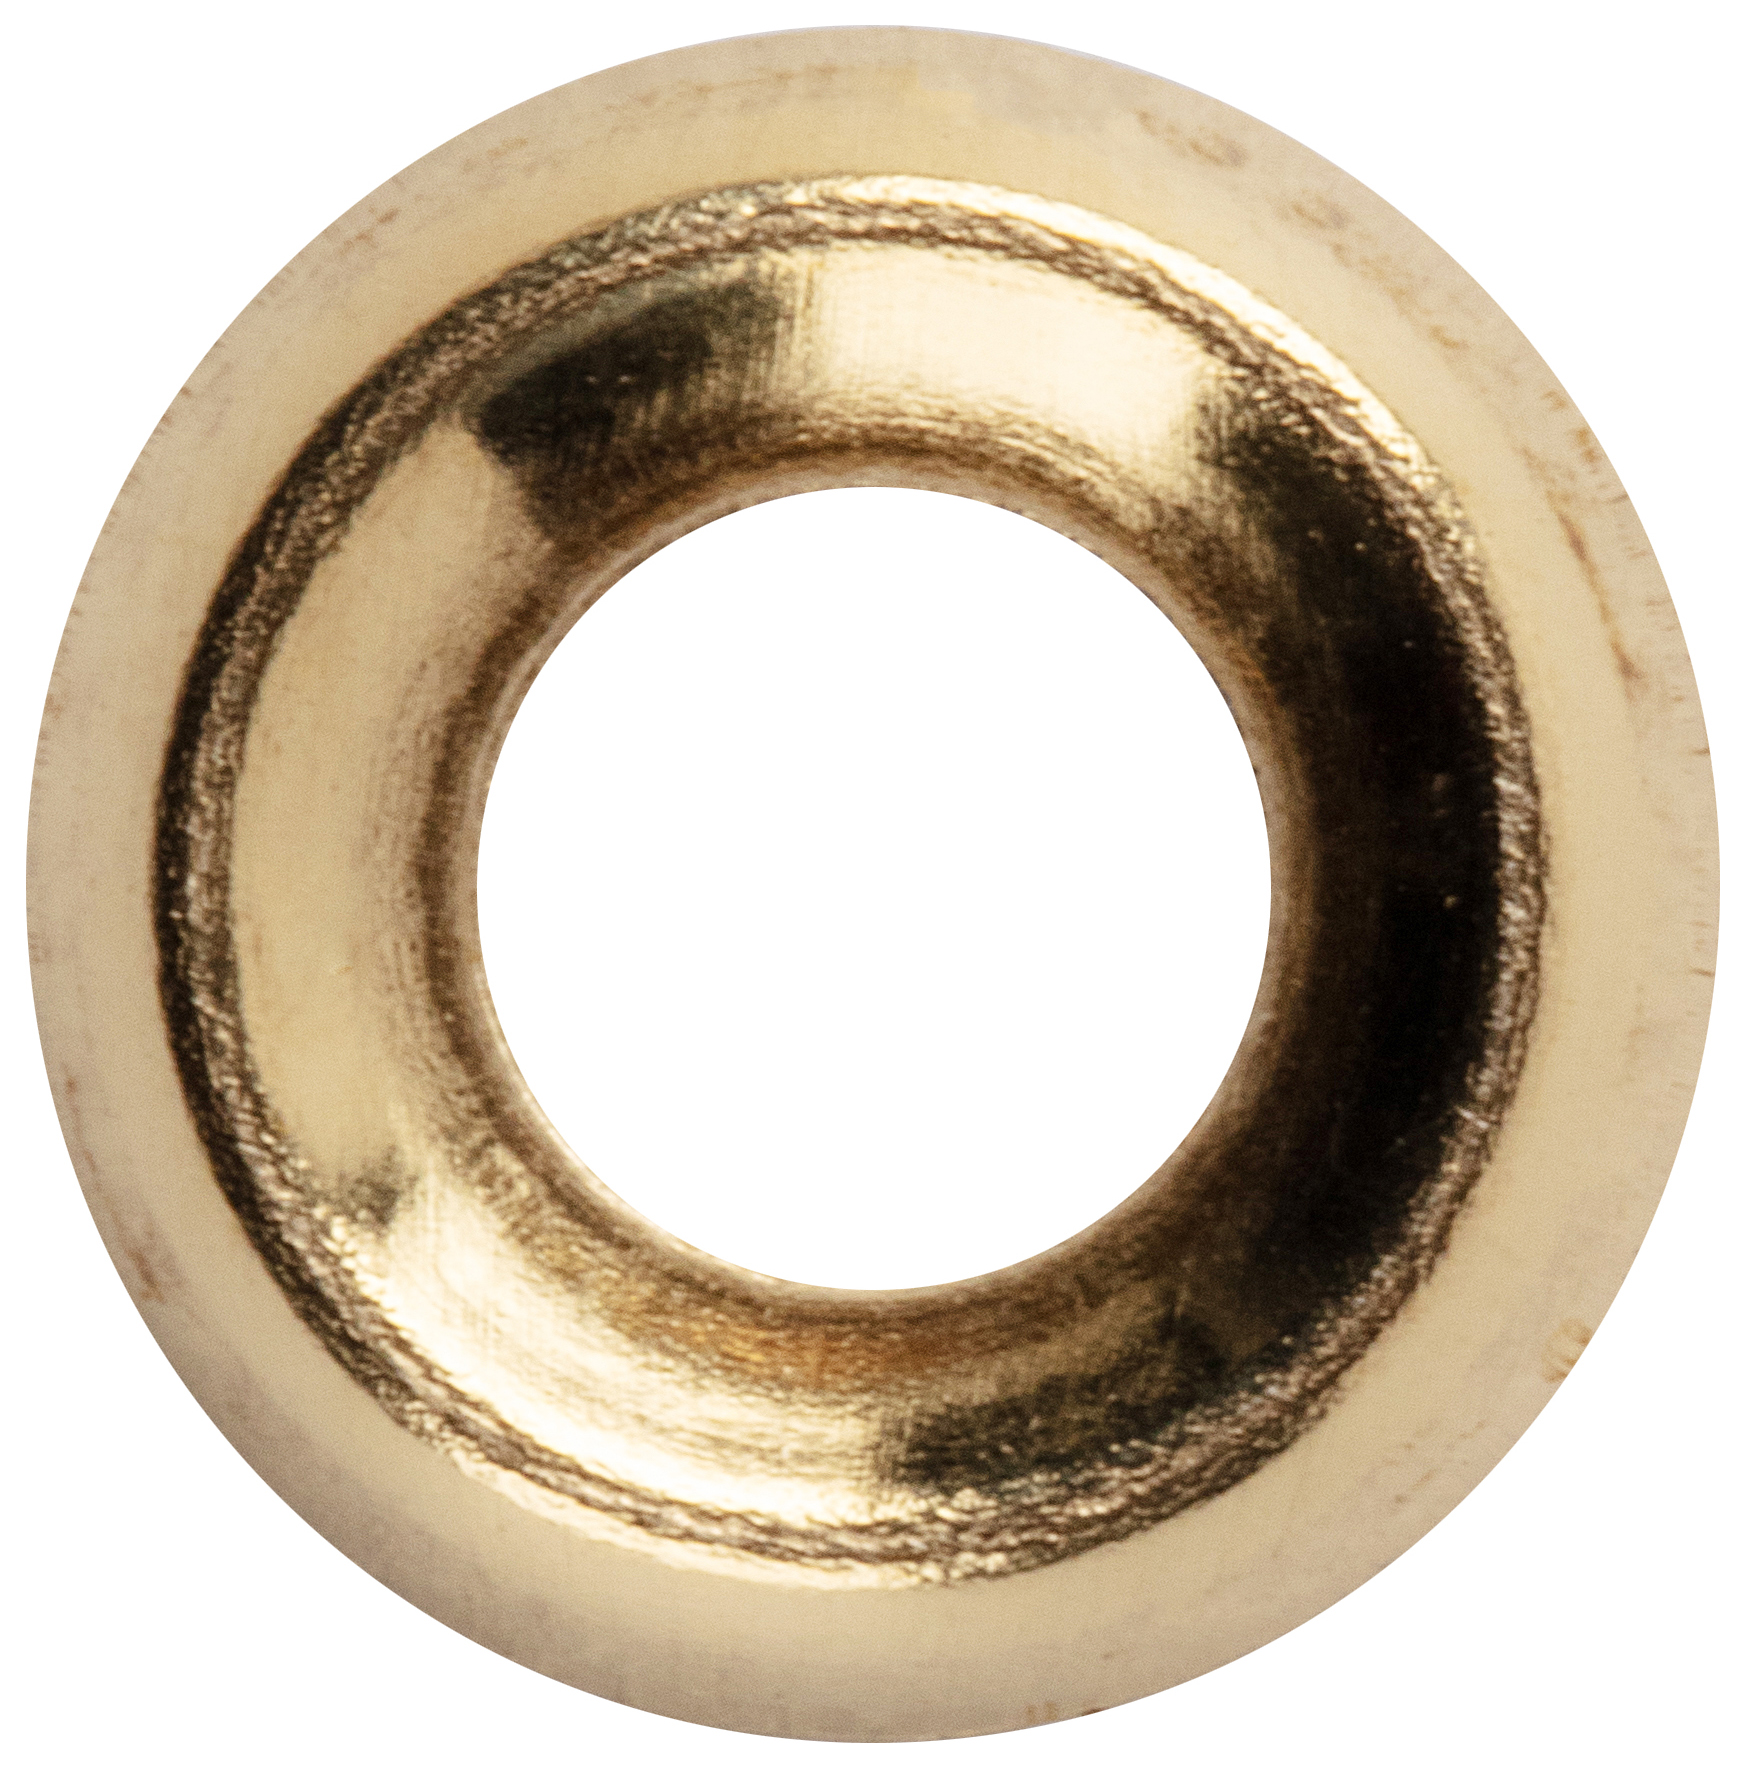 Wickes Brass Plated Screw Cup Washers - 4mm - Pack of 50